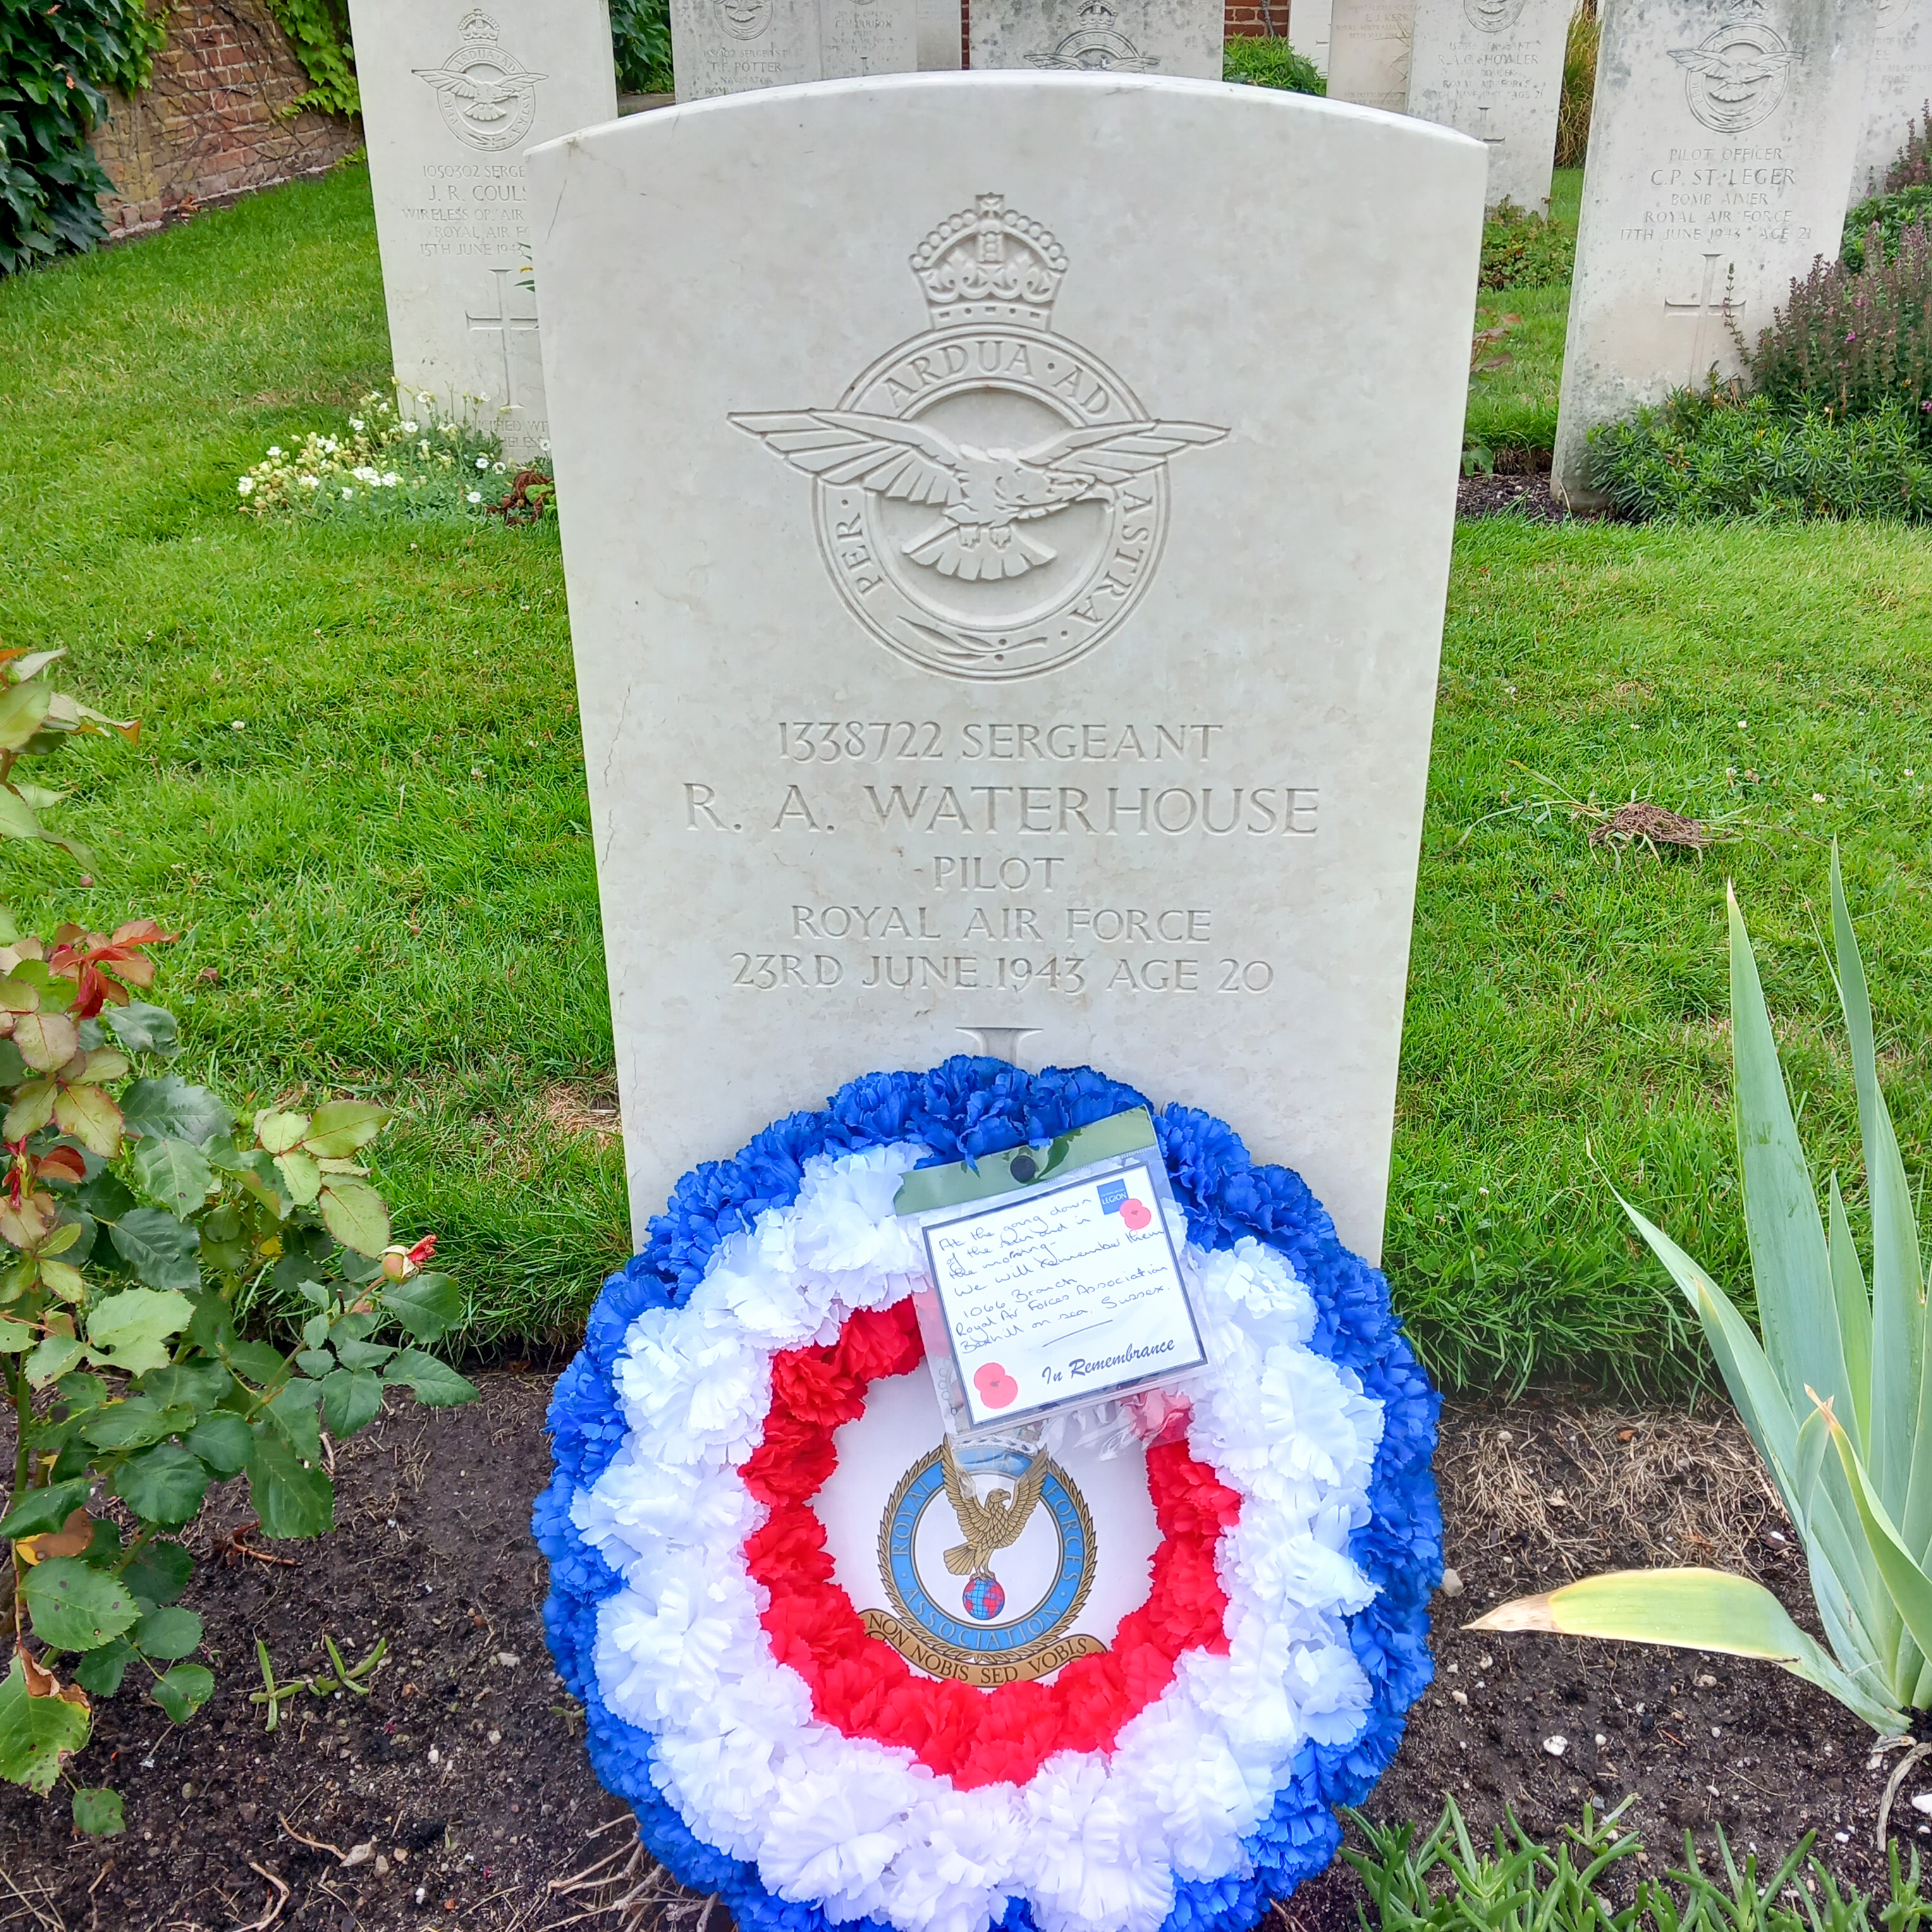 Photo of the grave and gravestone of Sergeant Roy Waterhouse, pilot of Lancaster SR-J